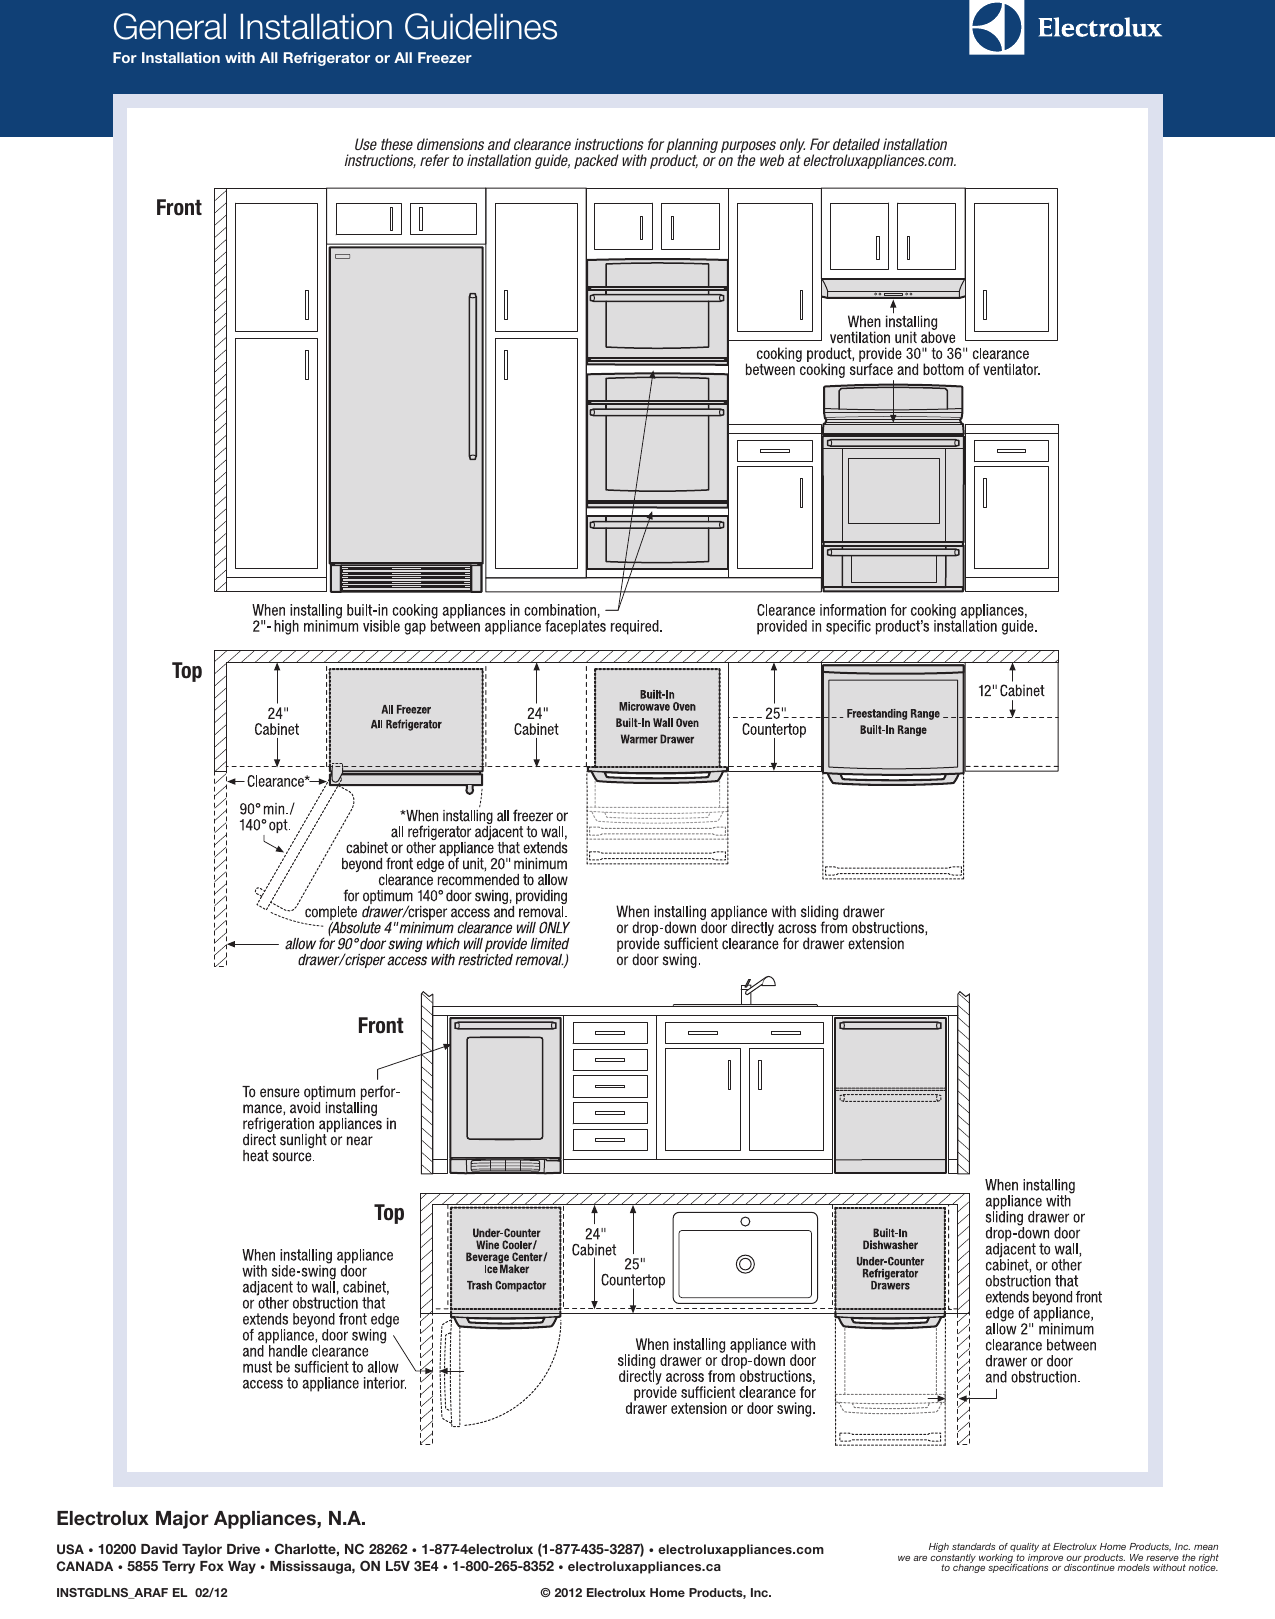 Page 6 of 6 - Electrolux Electrolux-24-Under-Counter-Wine-Cooler-With-Right-Door-Swing-Ei24Wc10Qs-Product-Specifications-Sheet-  Electrolux-24-under-counter-wine-cooler-with-right-door-swing-ei24wc10qs-product-specifications-sheet